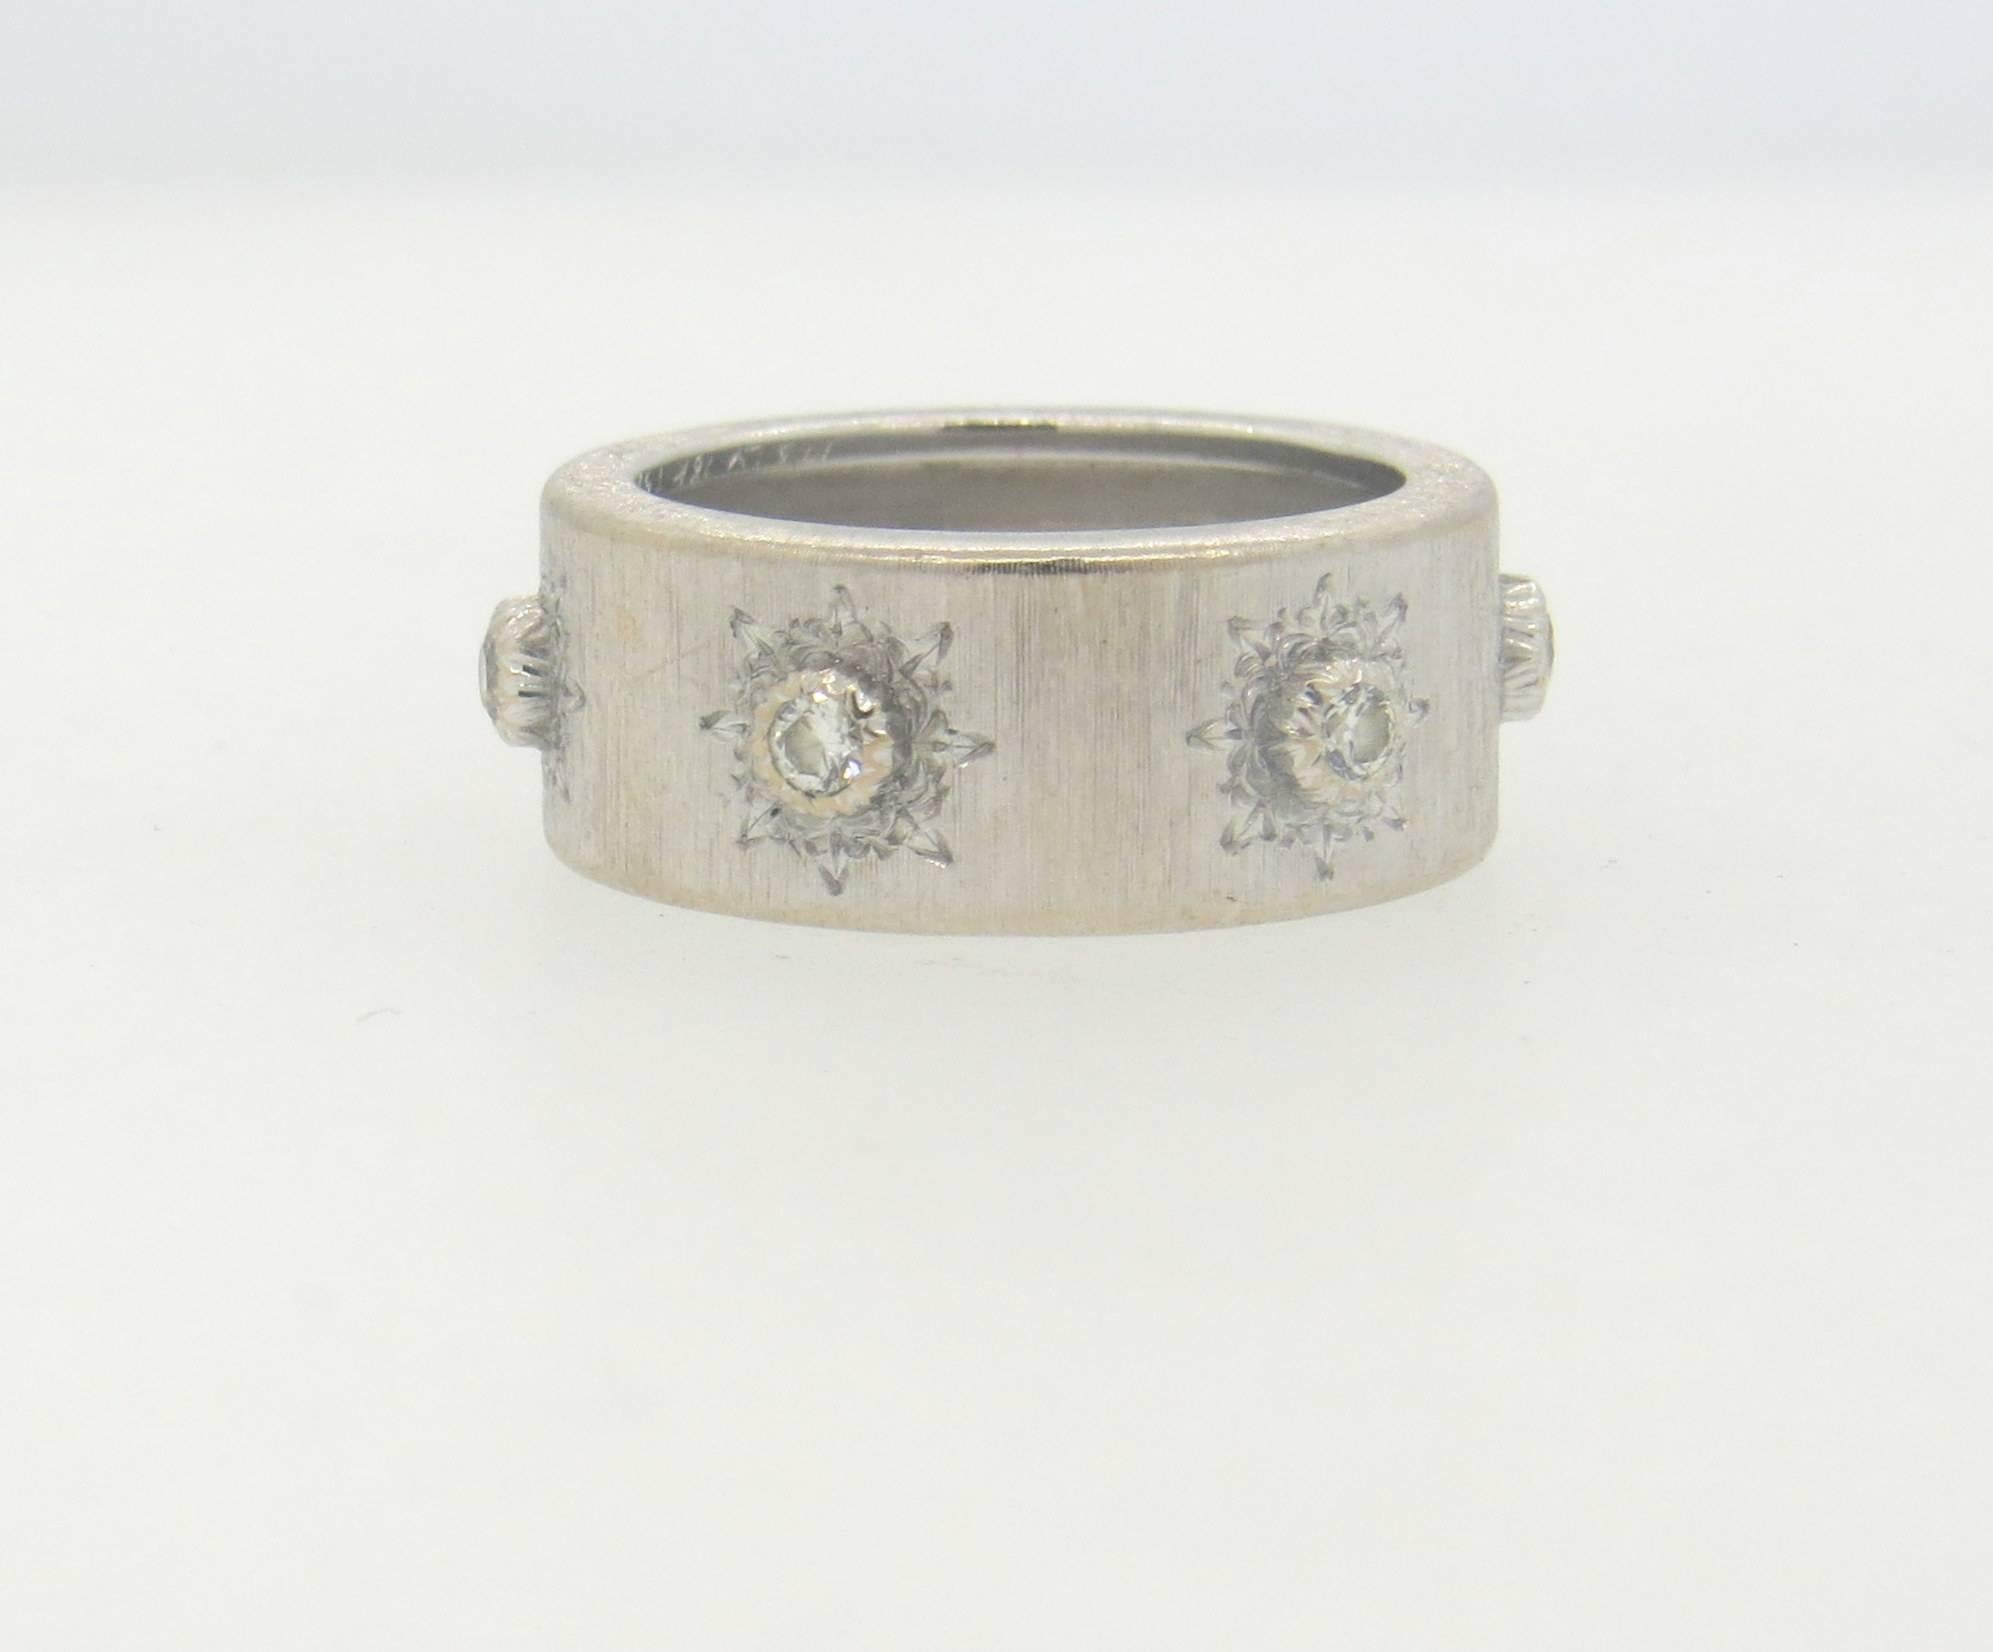 18k white gold wide wedding band ring, crafted by Buccellati, set with six diamonds. Ring is a size 6, ring is 8.5mm wide. Marked 18k, Italy, Buccellati. Weight of the piece - 7.1 grams
Comes with Buccellati box 